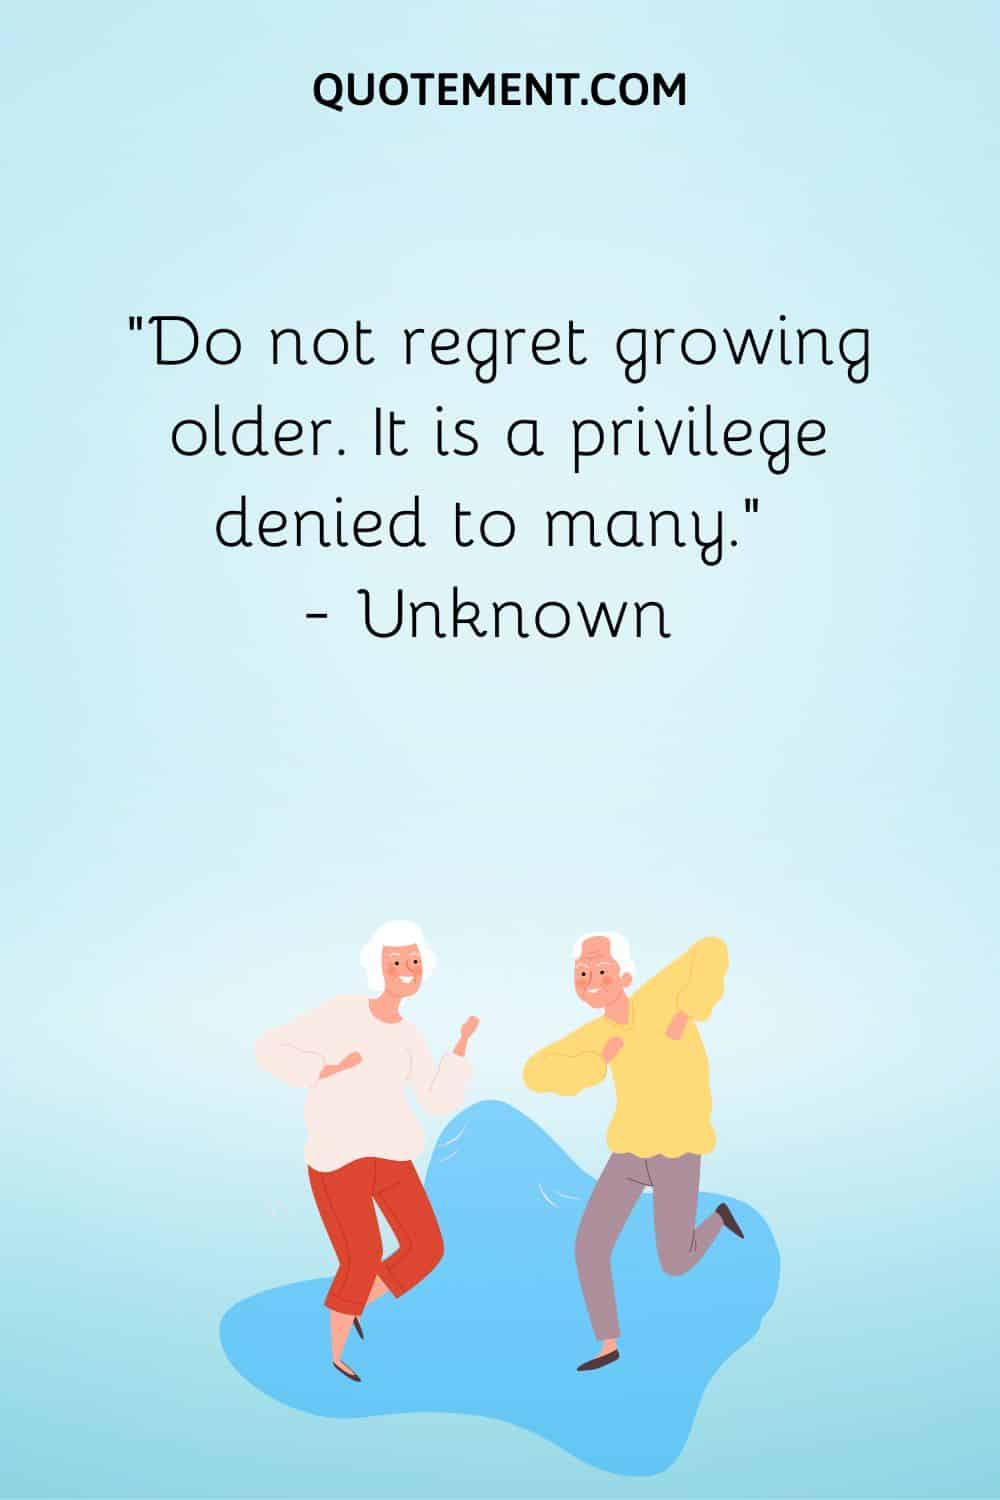 Do not regret growing older. It is a privilege denied to many